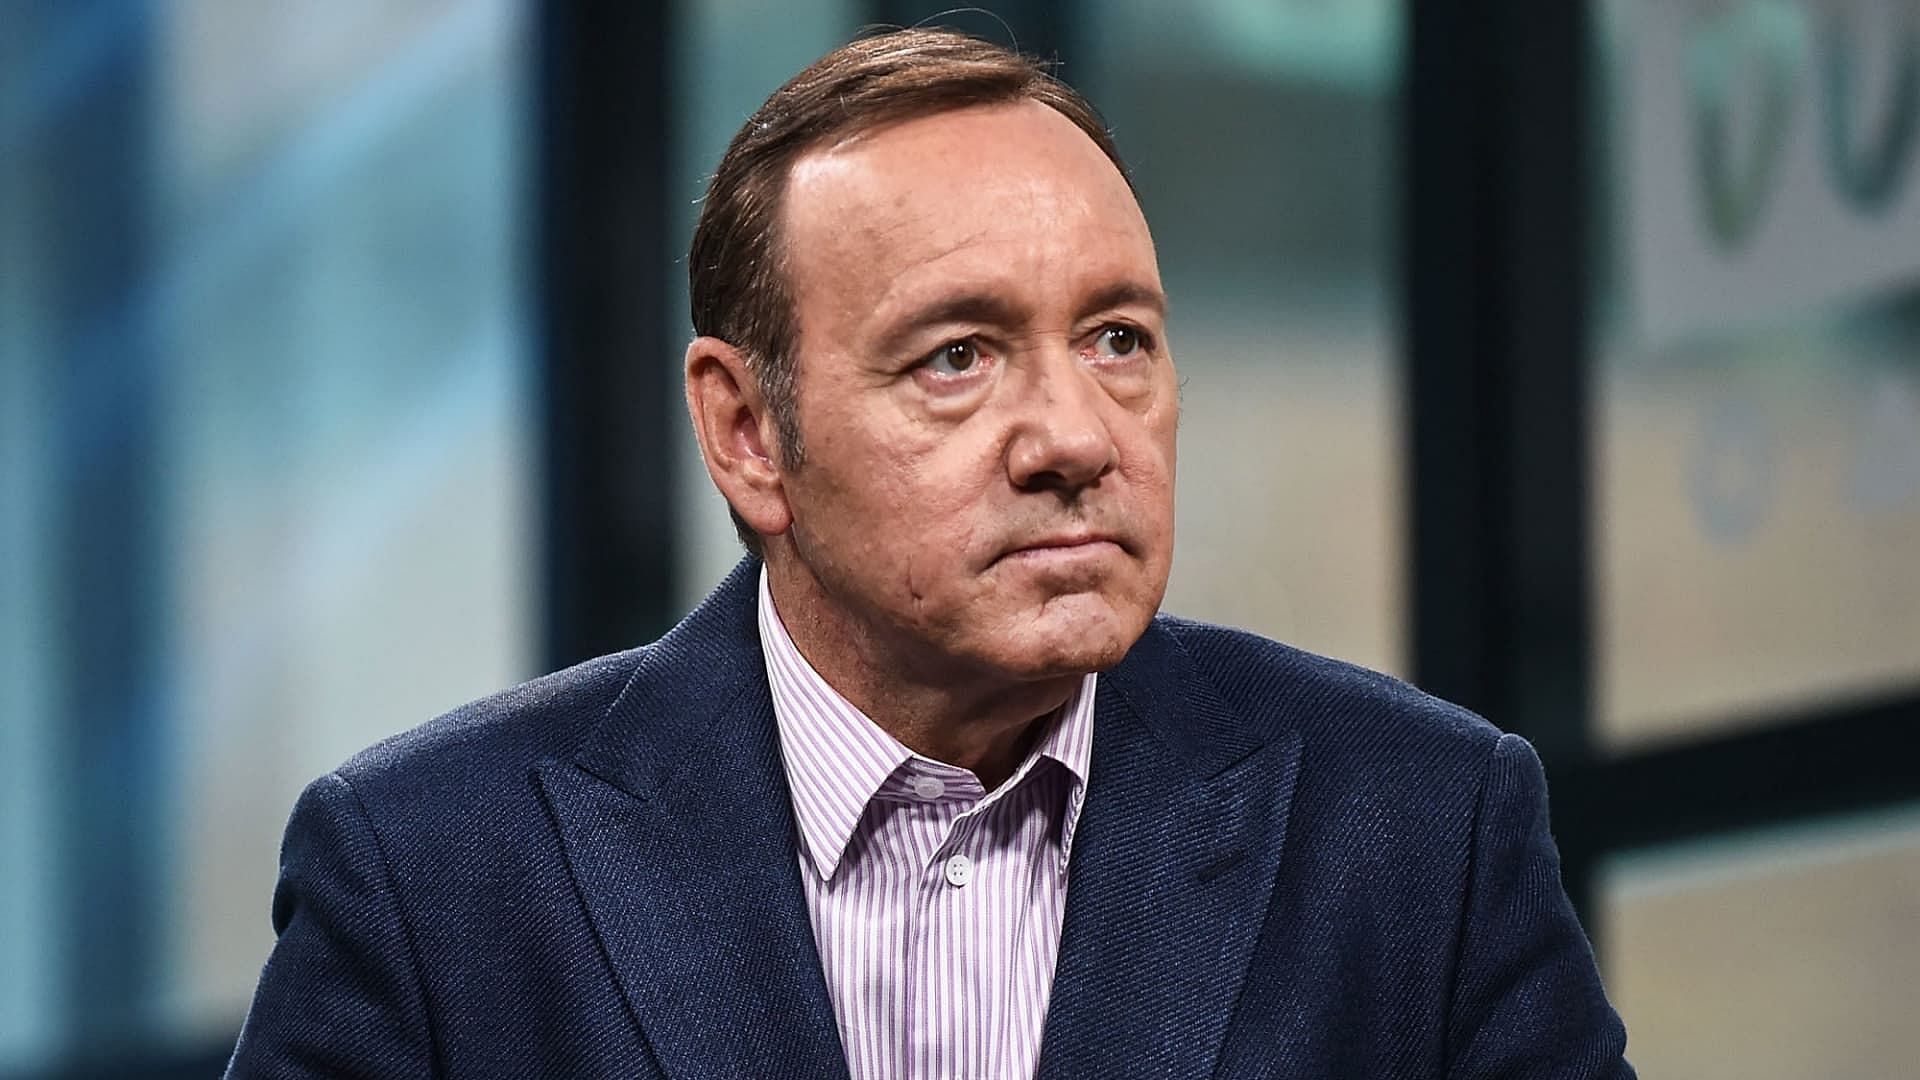 Actor Kevin Spacey charged with sexual assaults in the UK ( Image via Daniel Zuchnik / Getty Image)